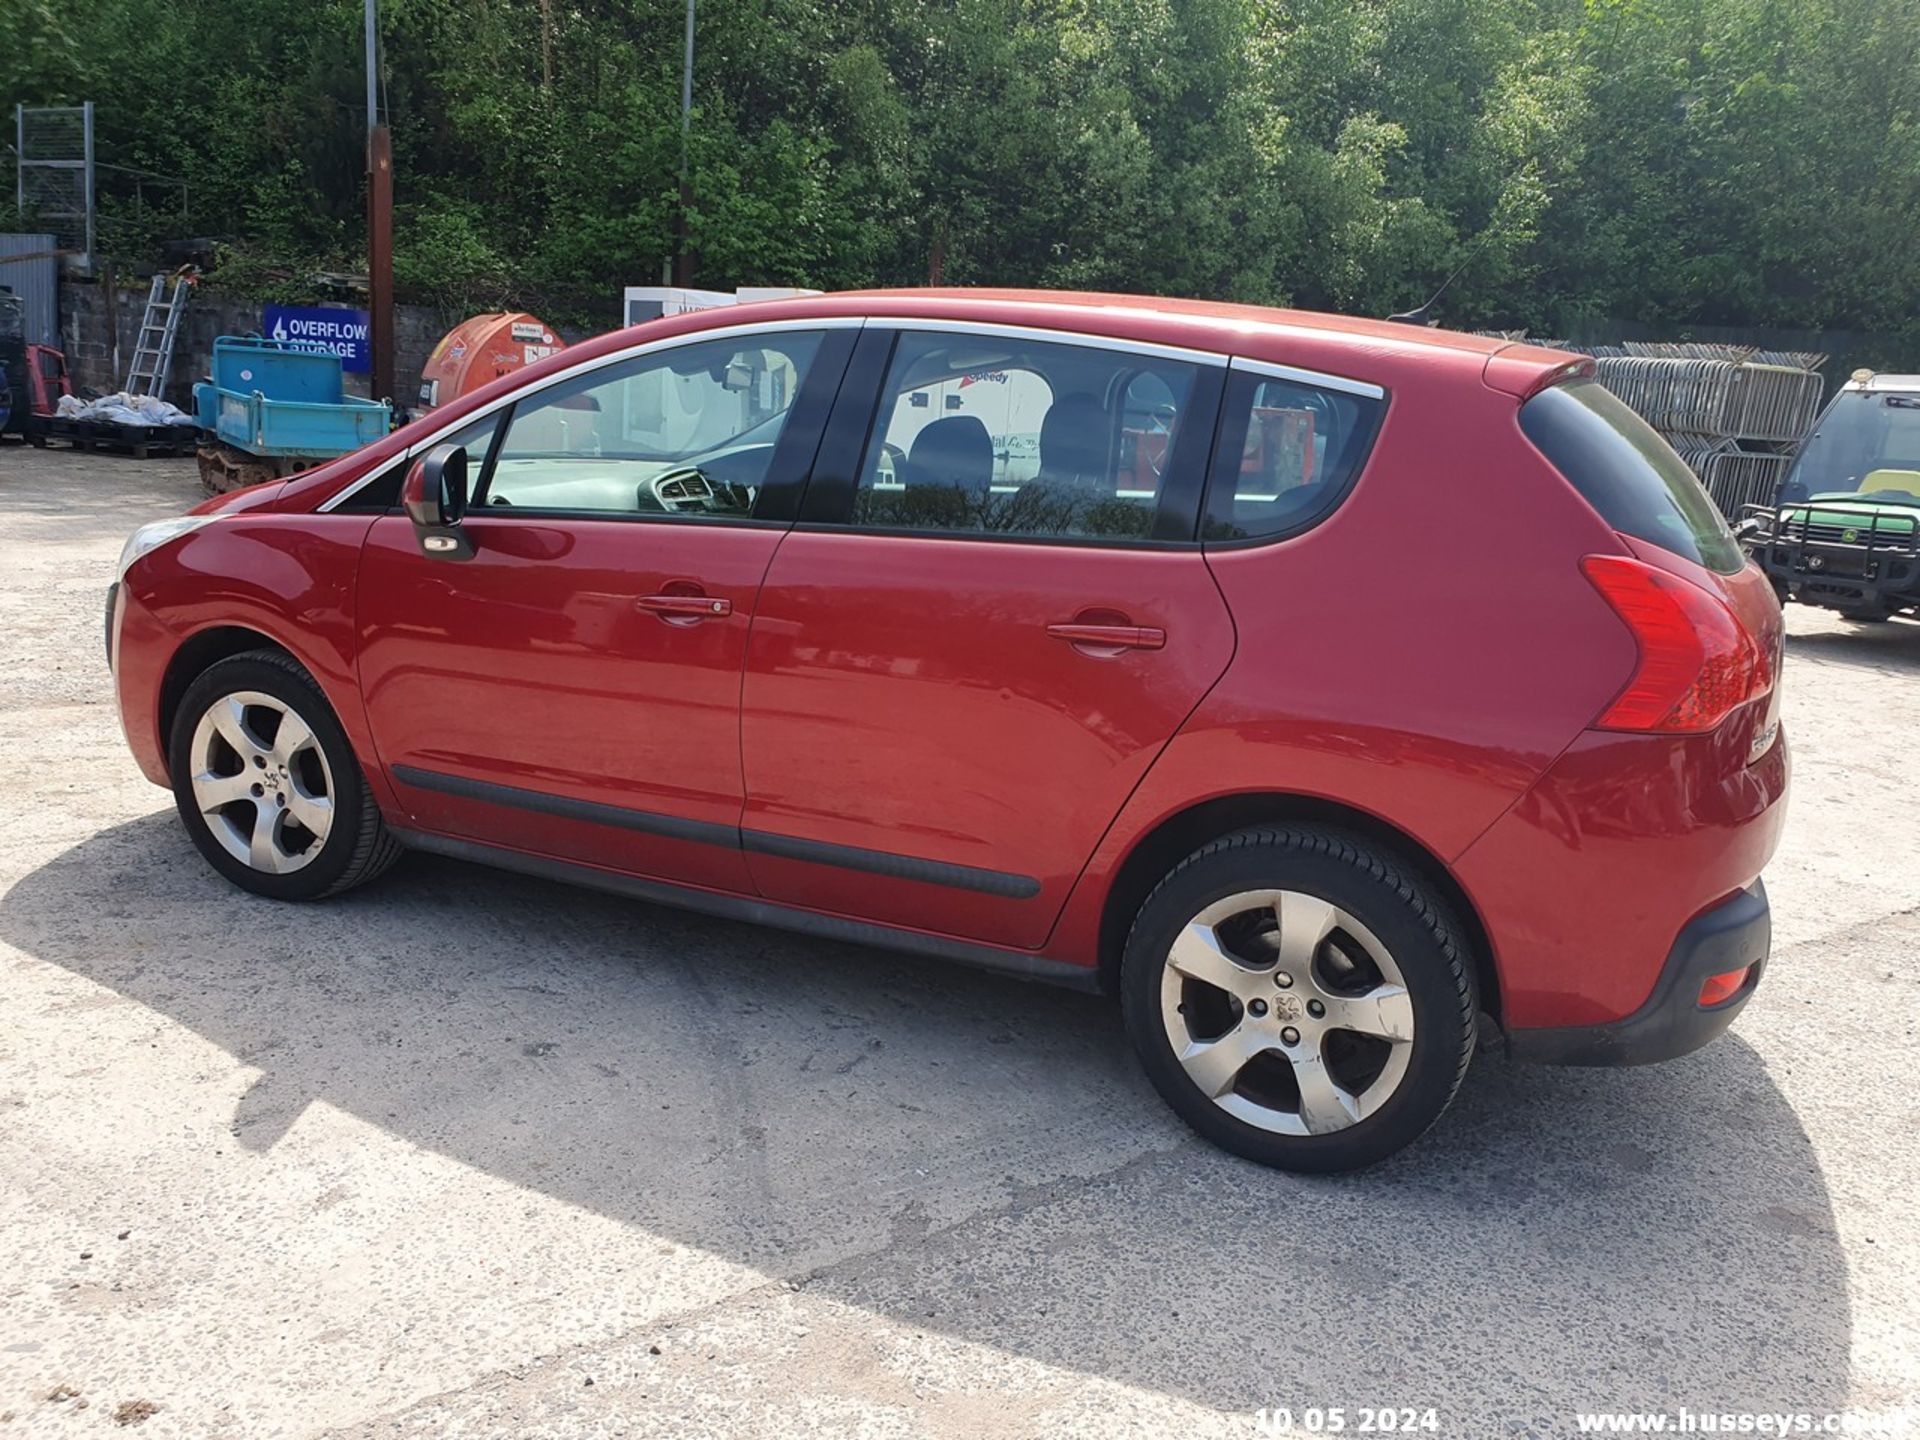 11/61 PEUGEOT 3008 SPORT E-HDI S-A - 1560cc 5dr Hatchback (Red, 89k) - Image 17 of 49